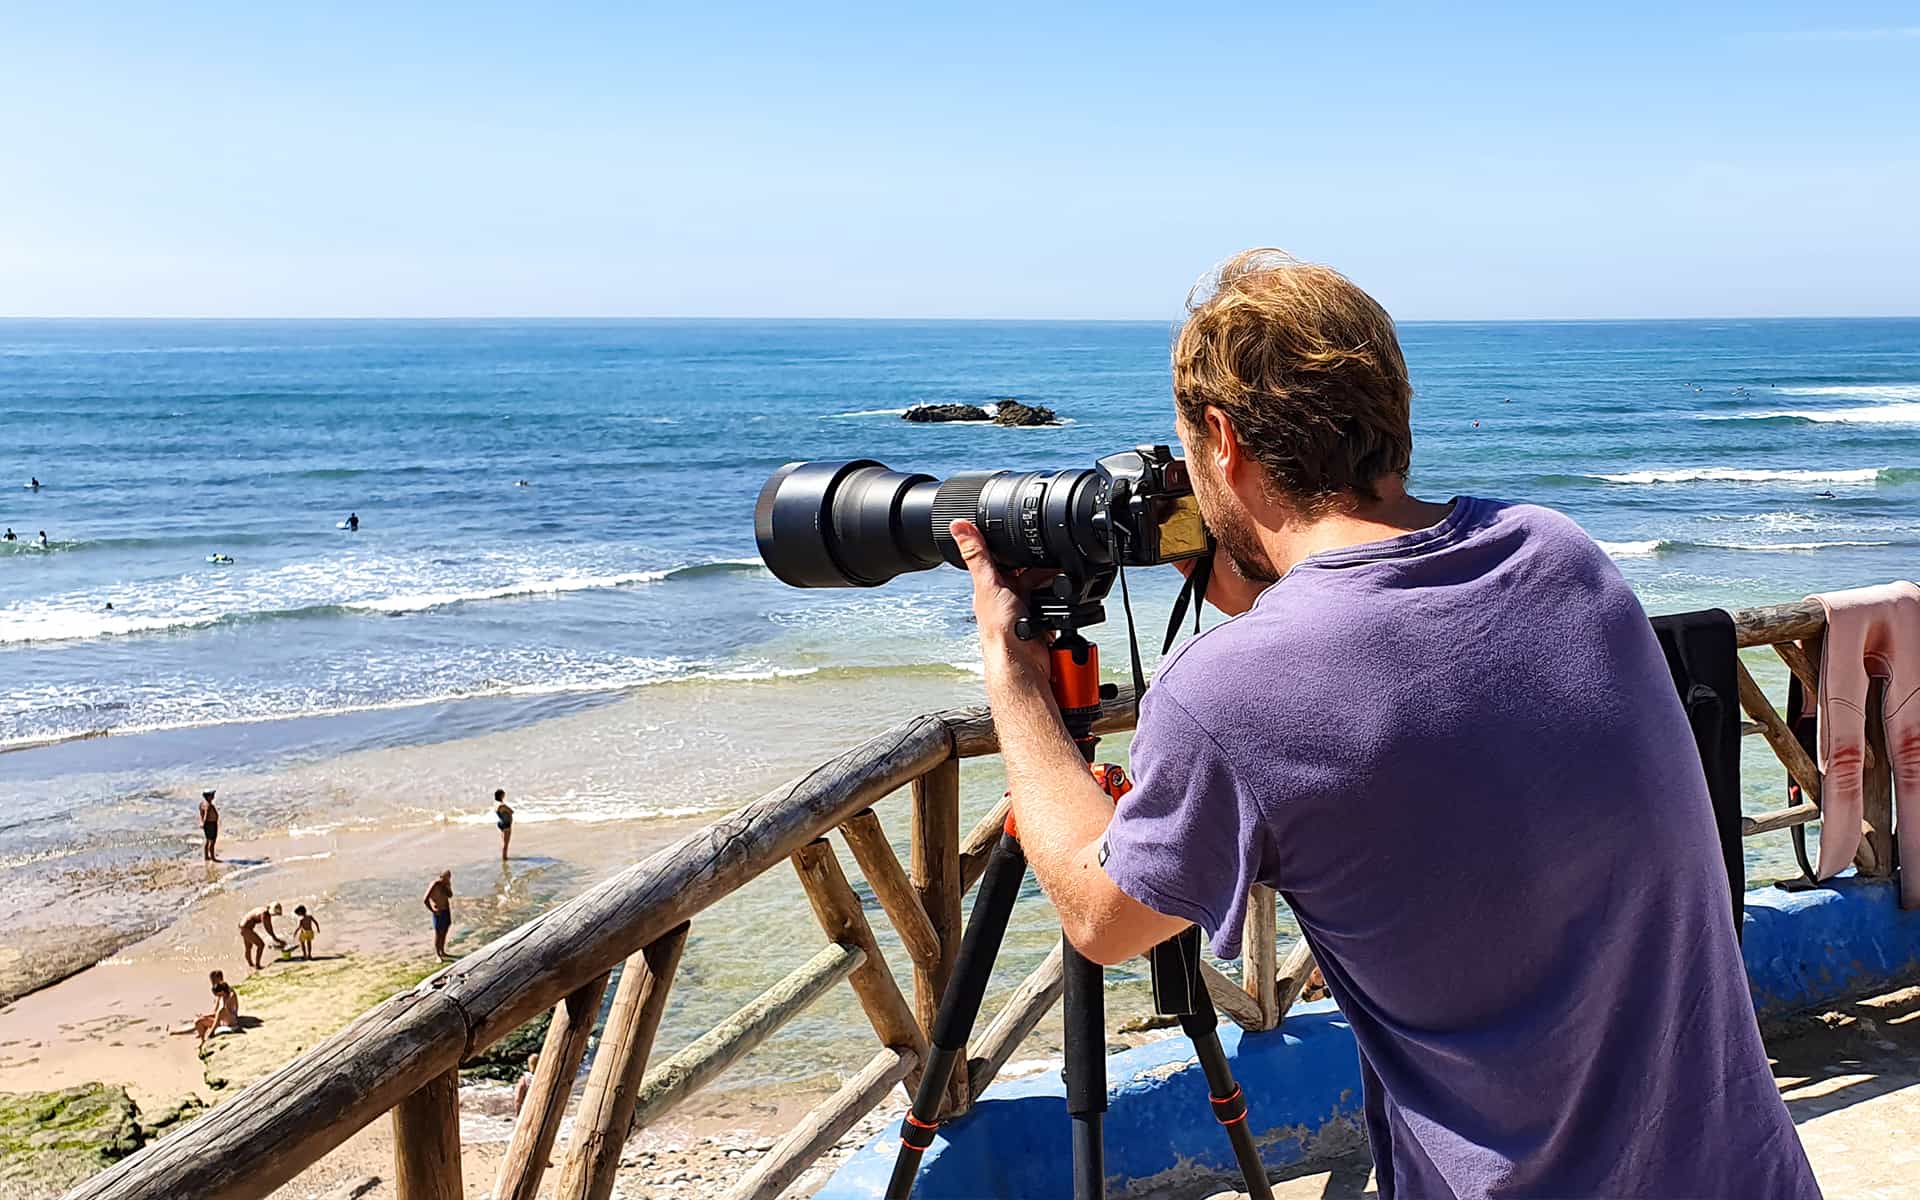 surf camp ericeira - Activities - Photo Session